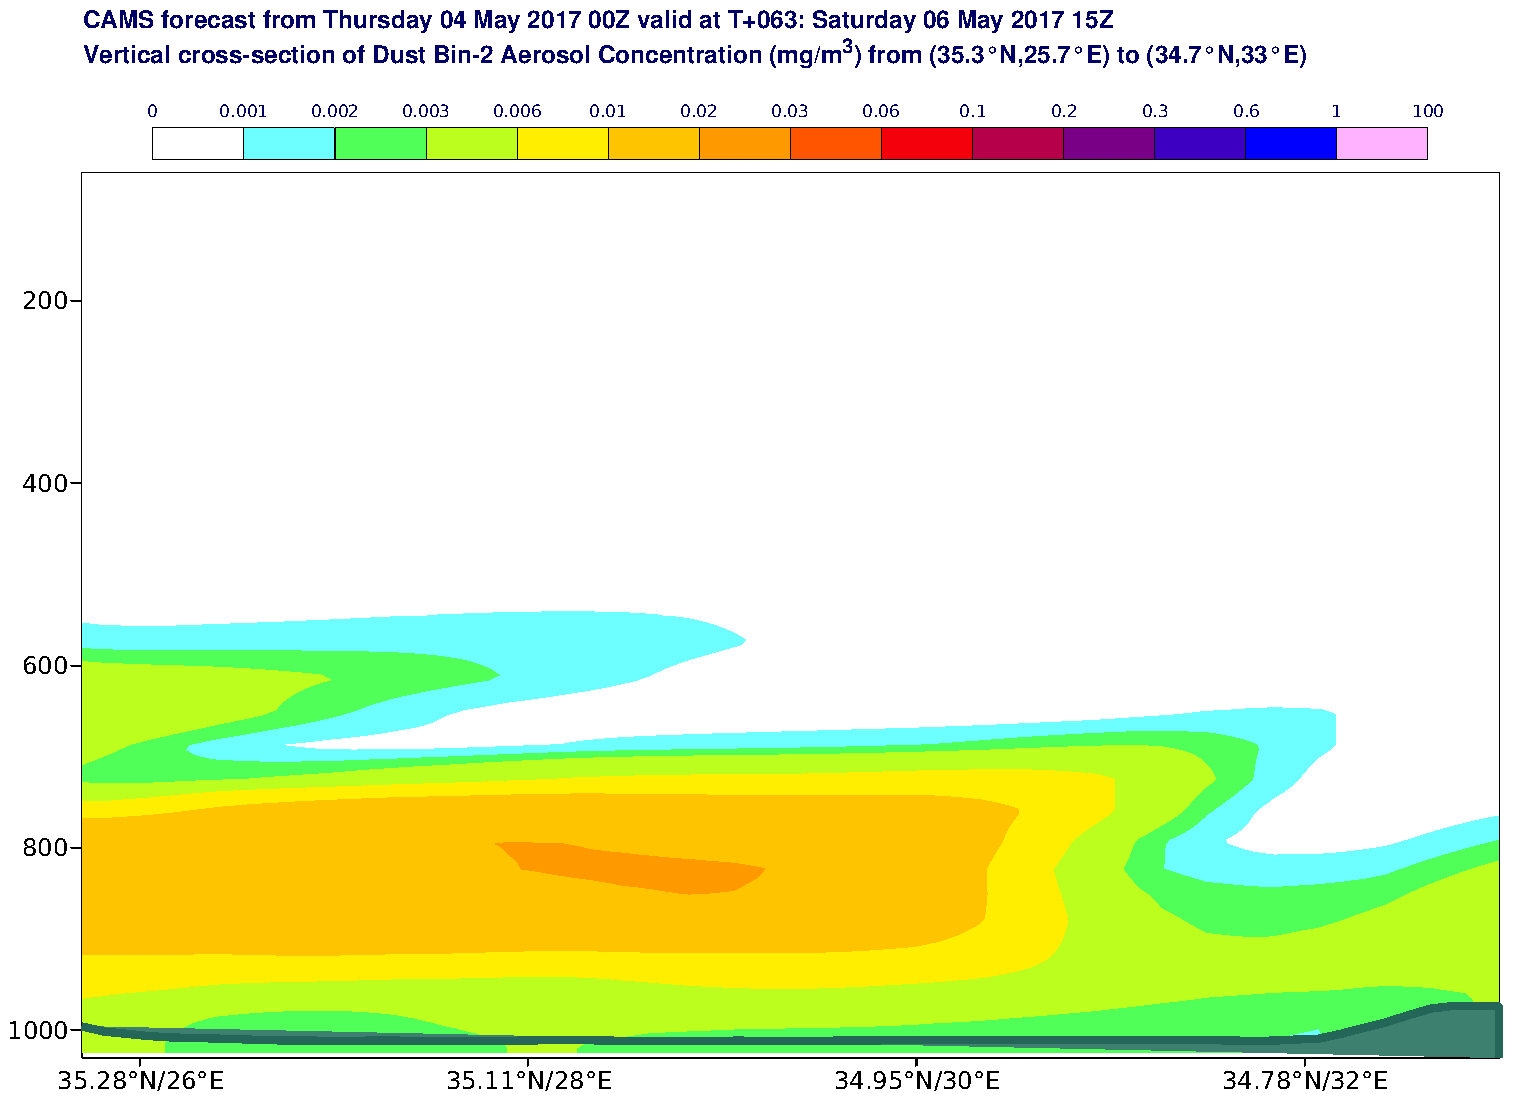 Vertical cross-section of Dust Bin-2 Aerosol Concentration (mg/m3) valid at T63 - 2017-05-06 15:00